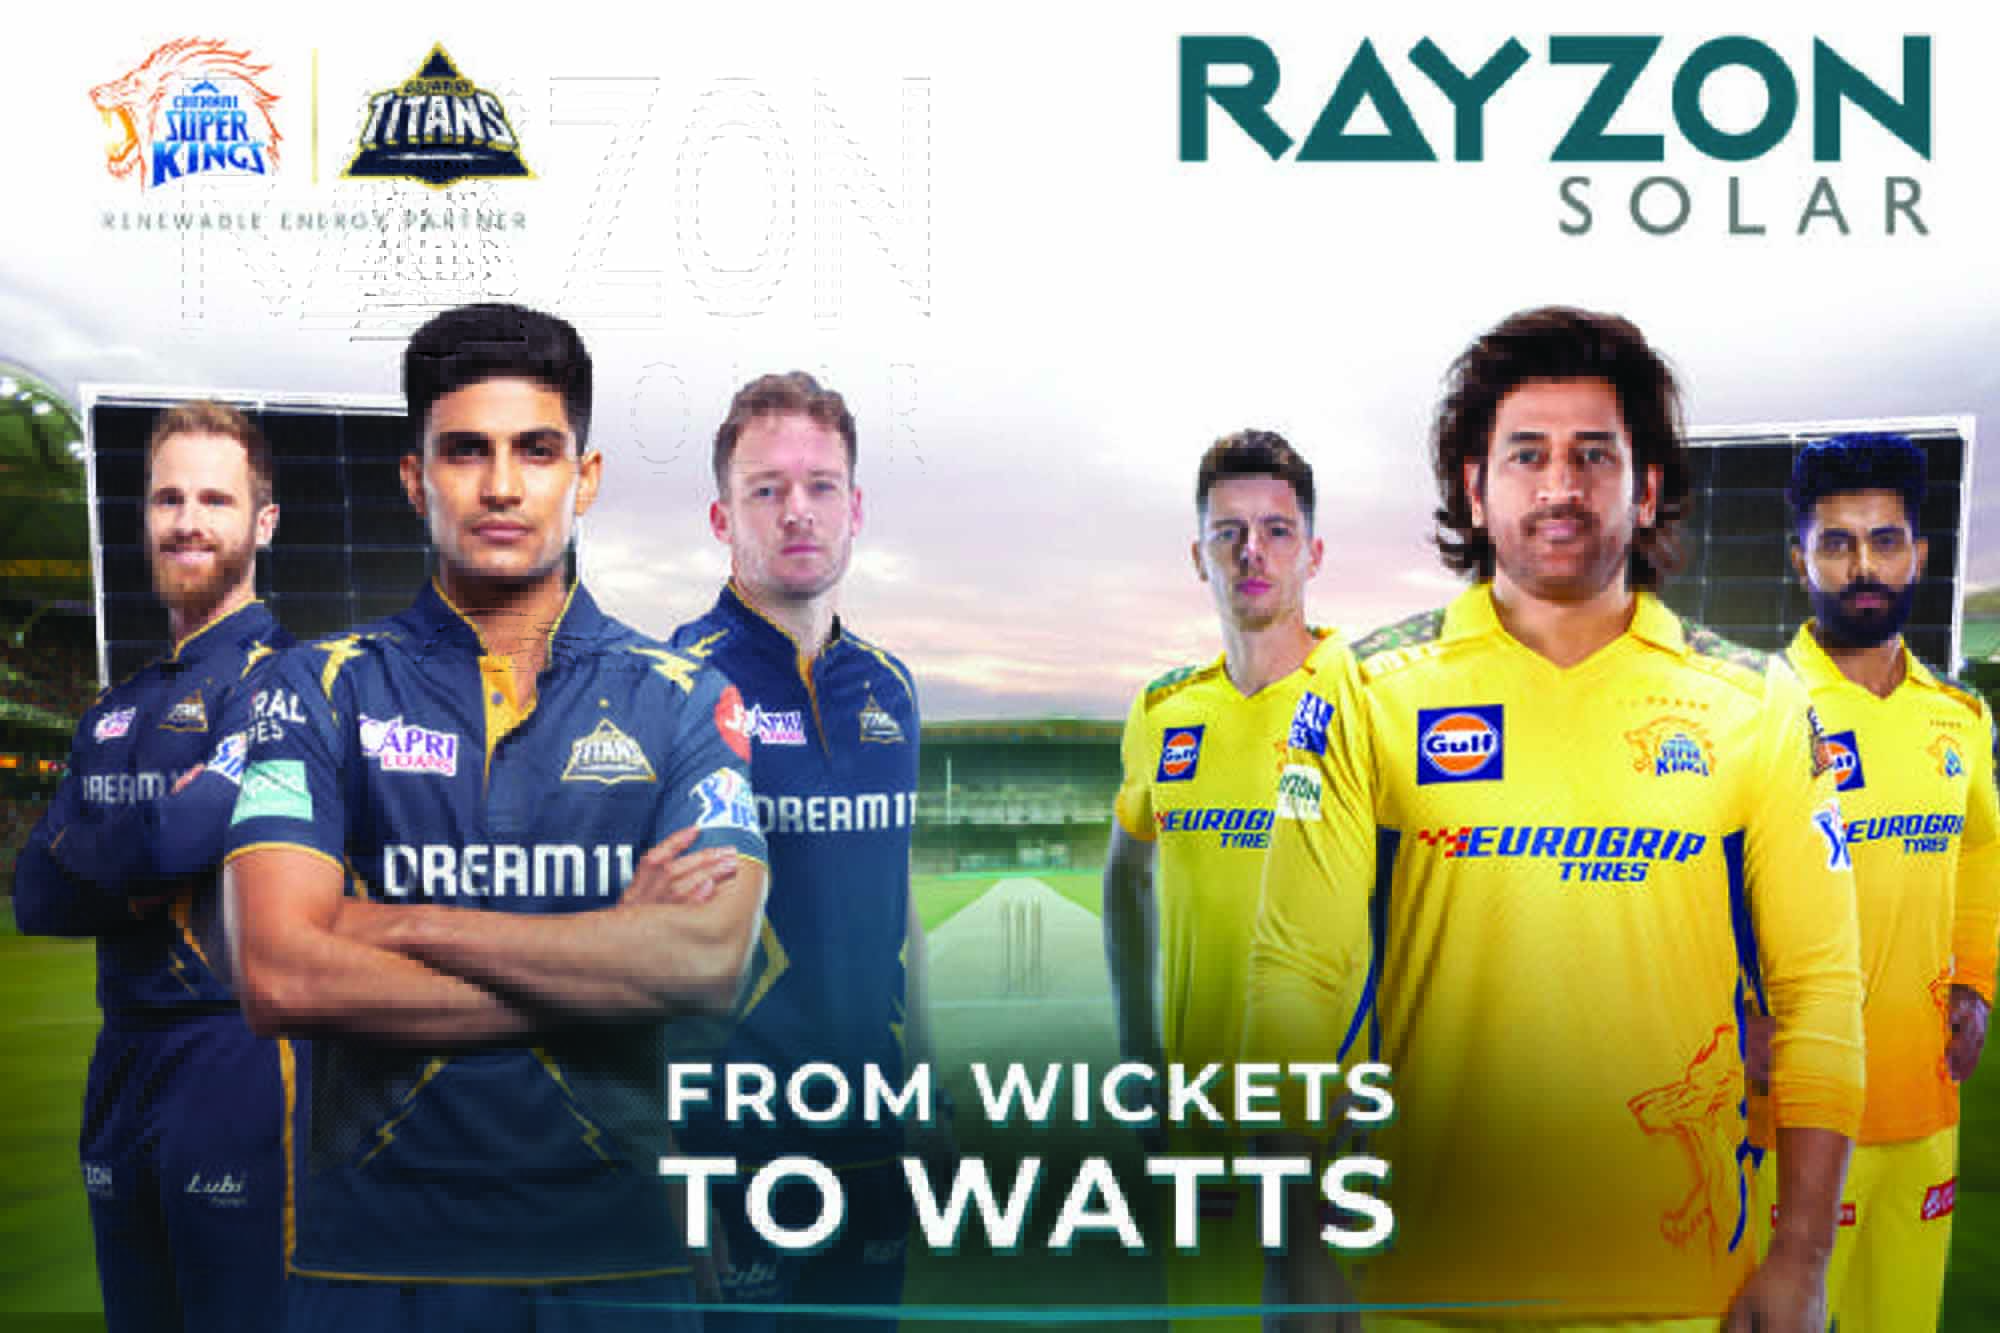 Rayzon Solar teams up with cricket giants for net-zero future